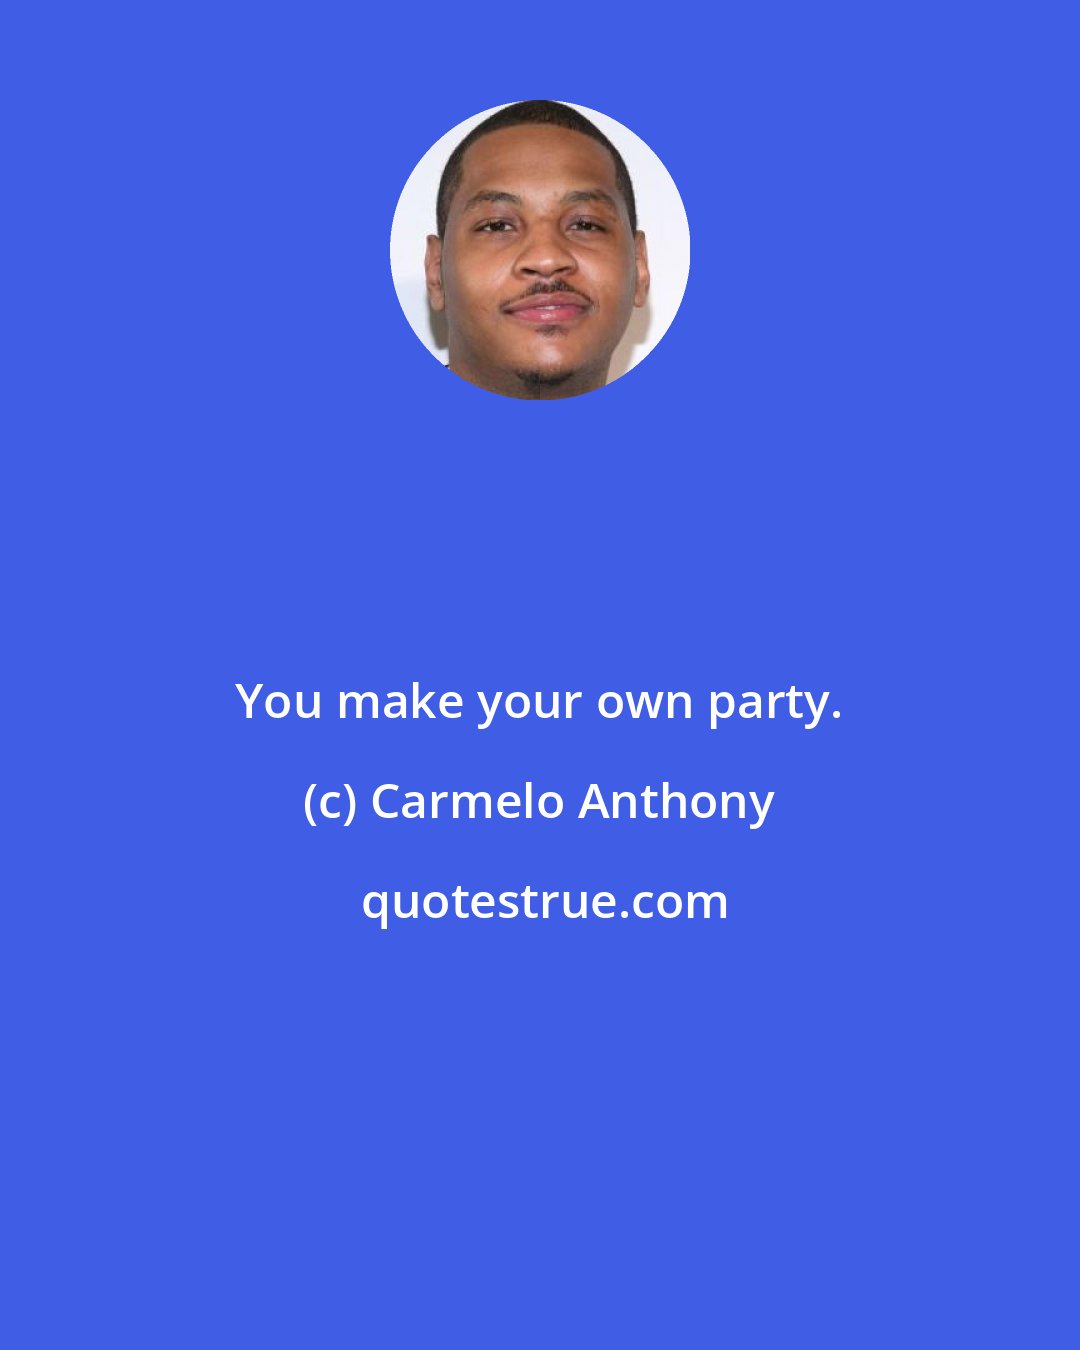 Carmelo Anthony: You make your own party.